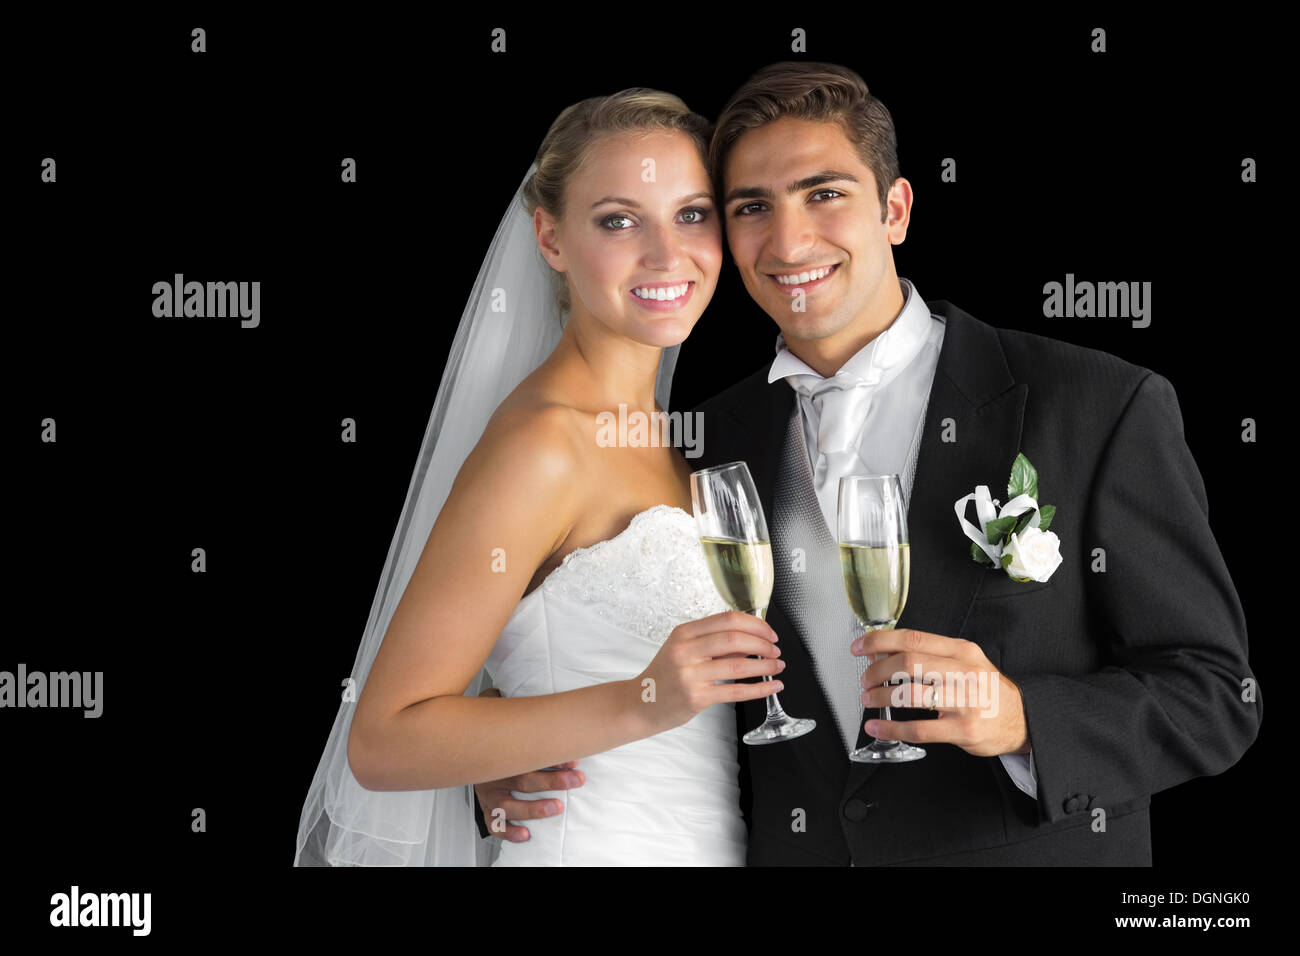 Sweet young couple posing with champagne glasses Banque D'Images